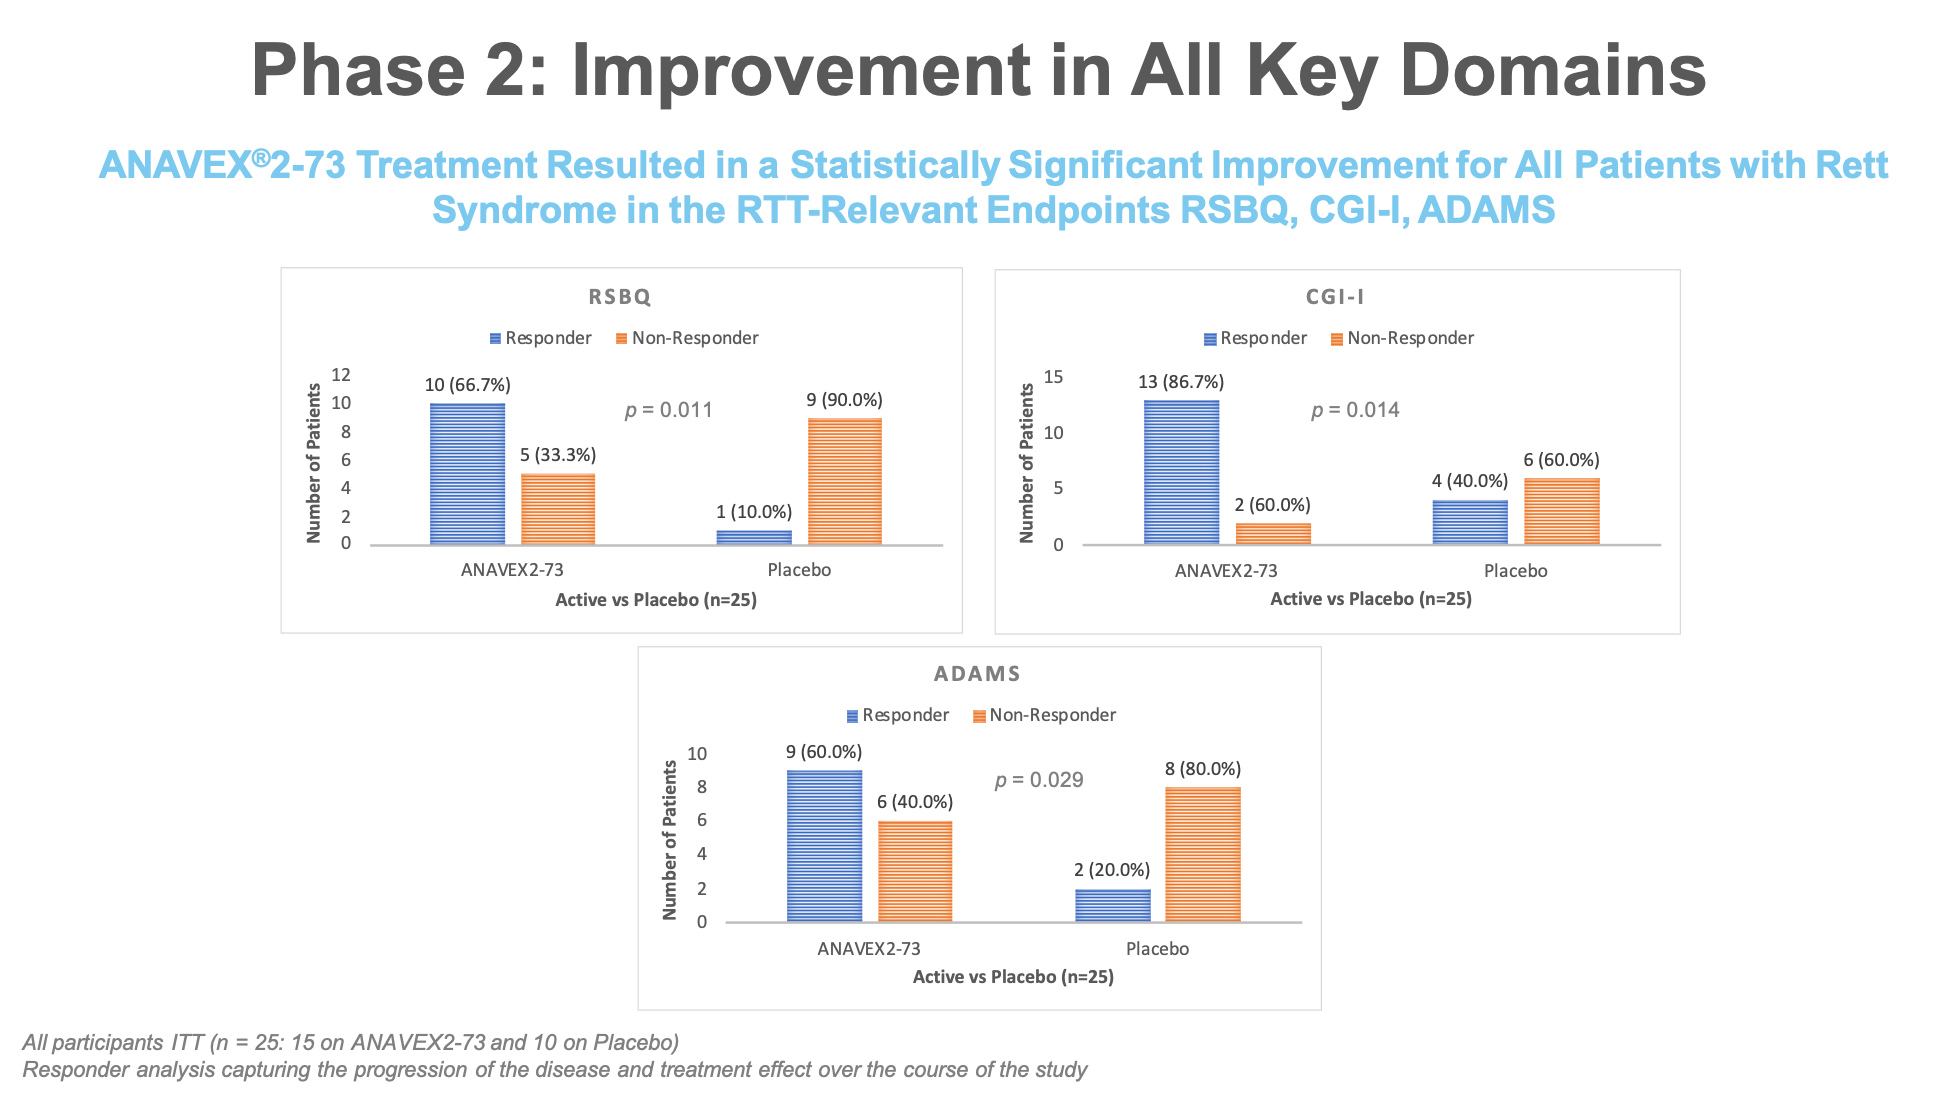 Phase 2: Improvement in All Key Domains